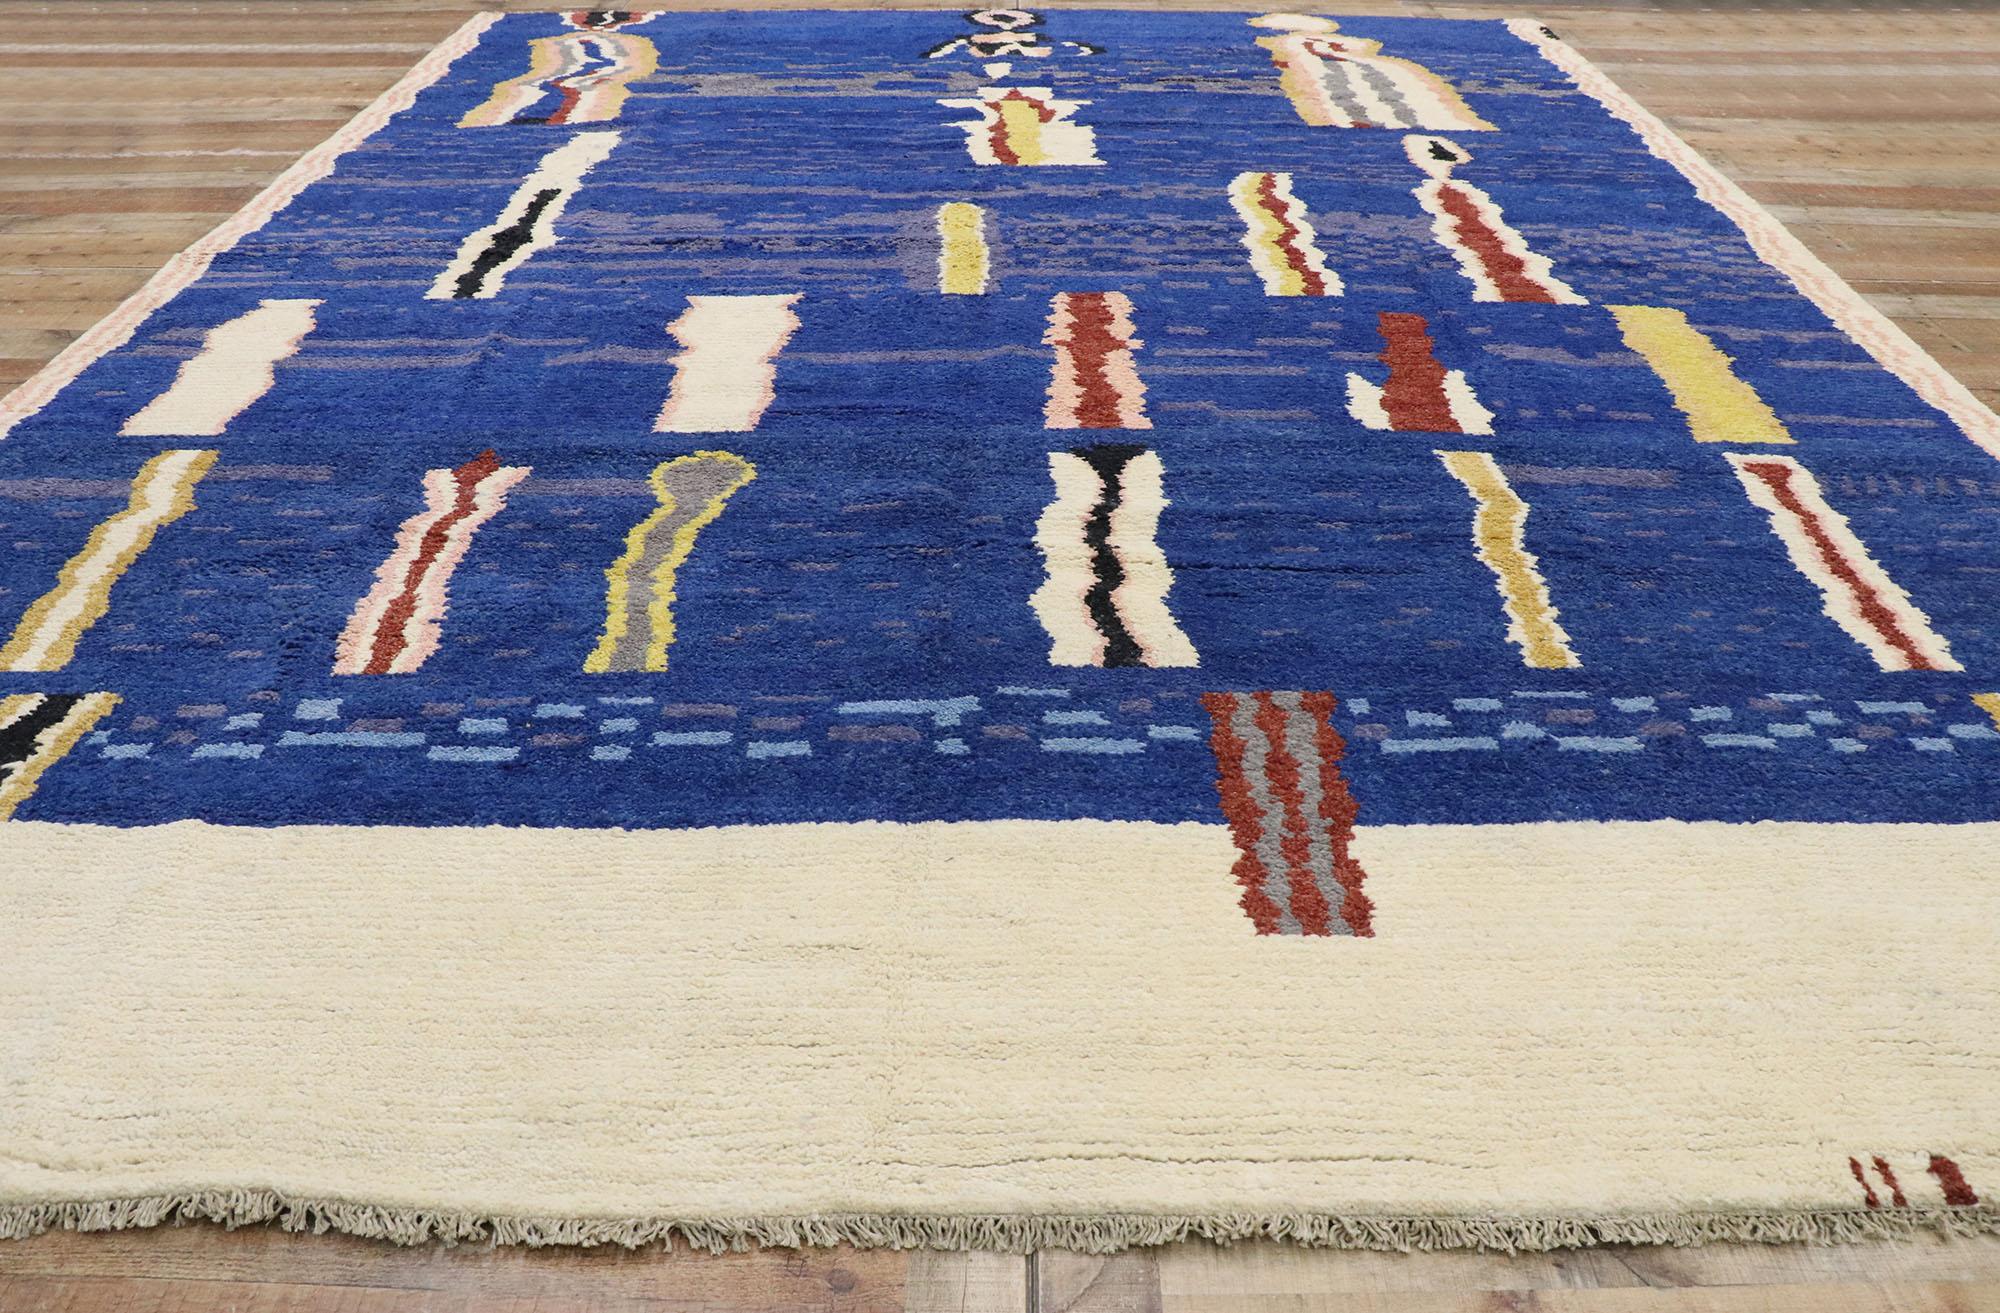 New Contemporary Moroccan Rug Inspired by Robert Delaunay & Paul Klee In New Condition For Sale In Dallas, TX